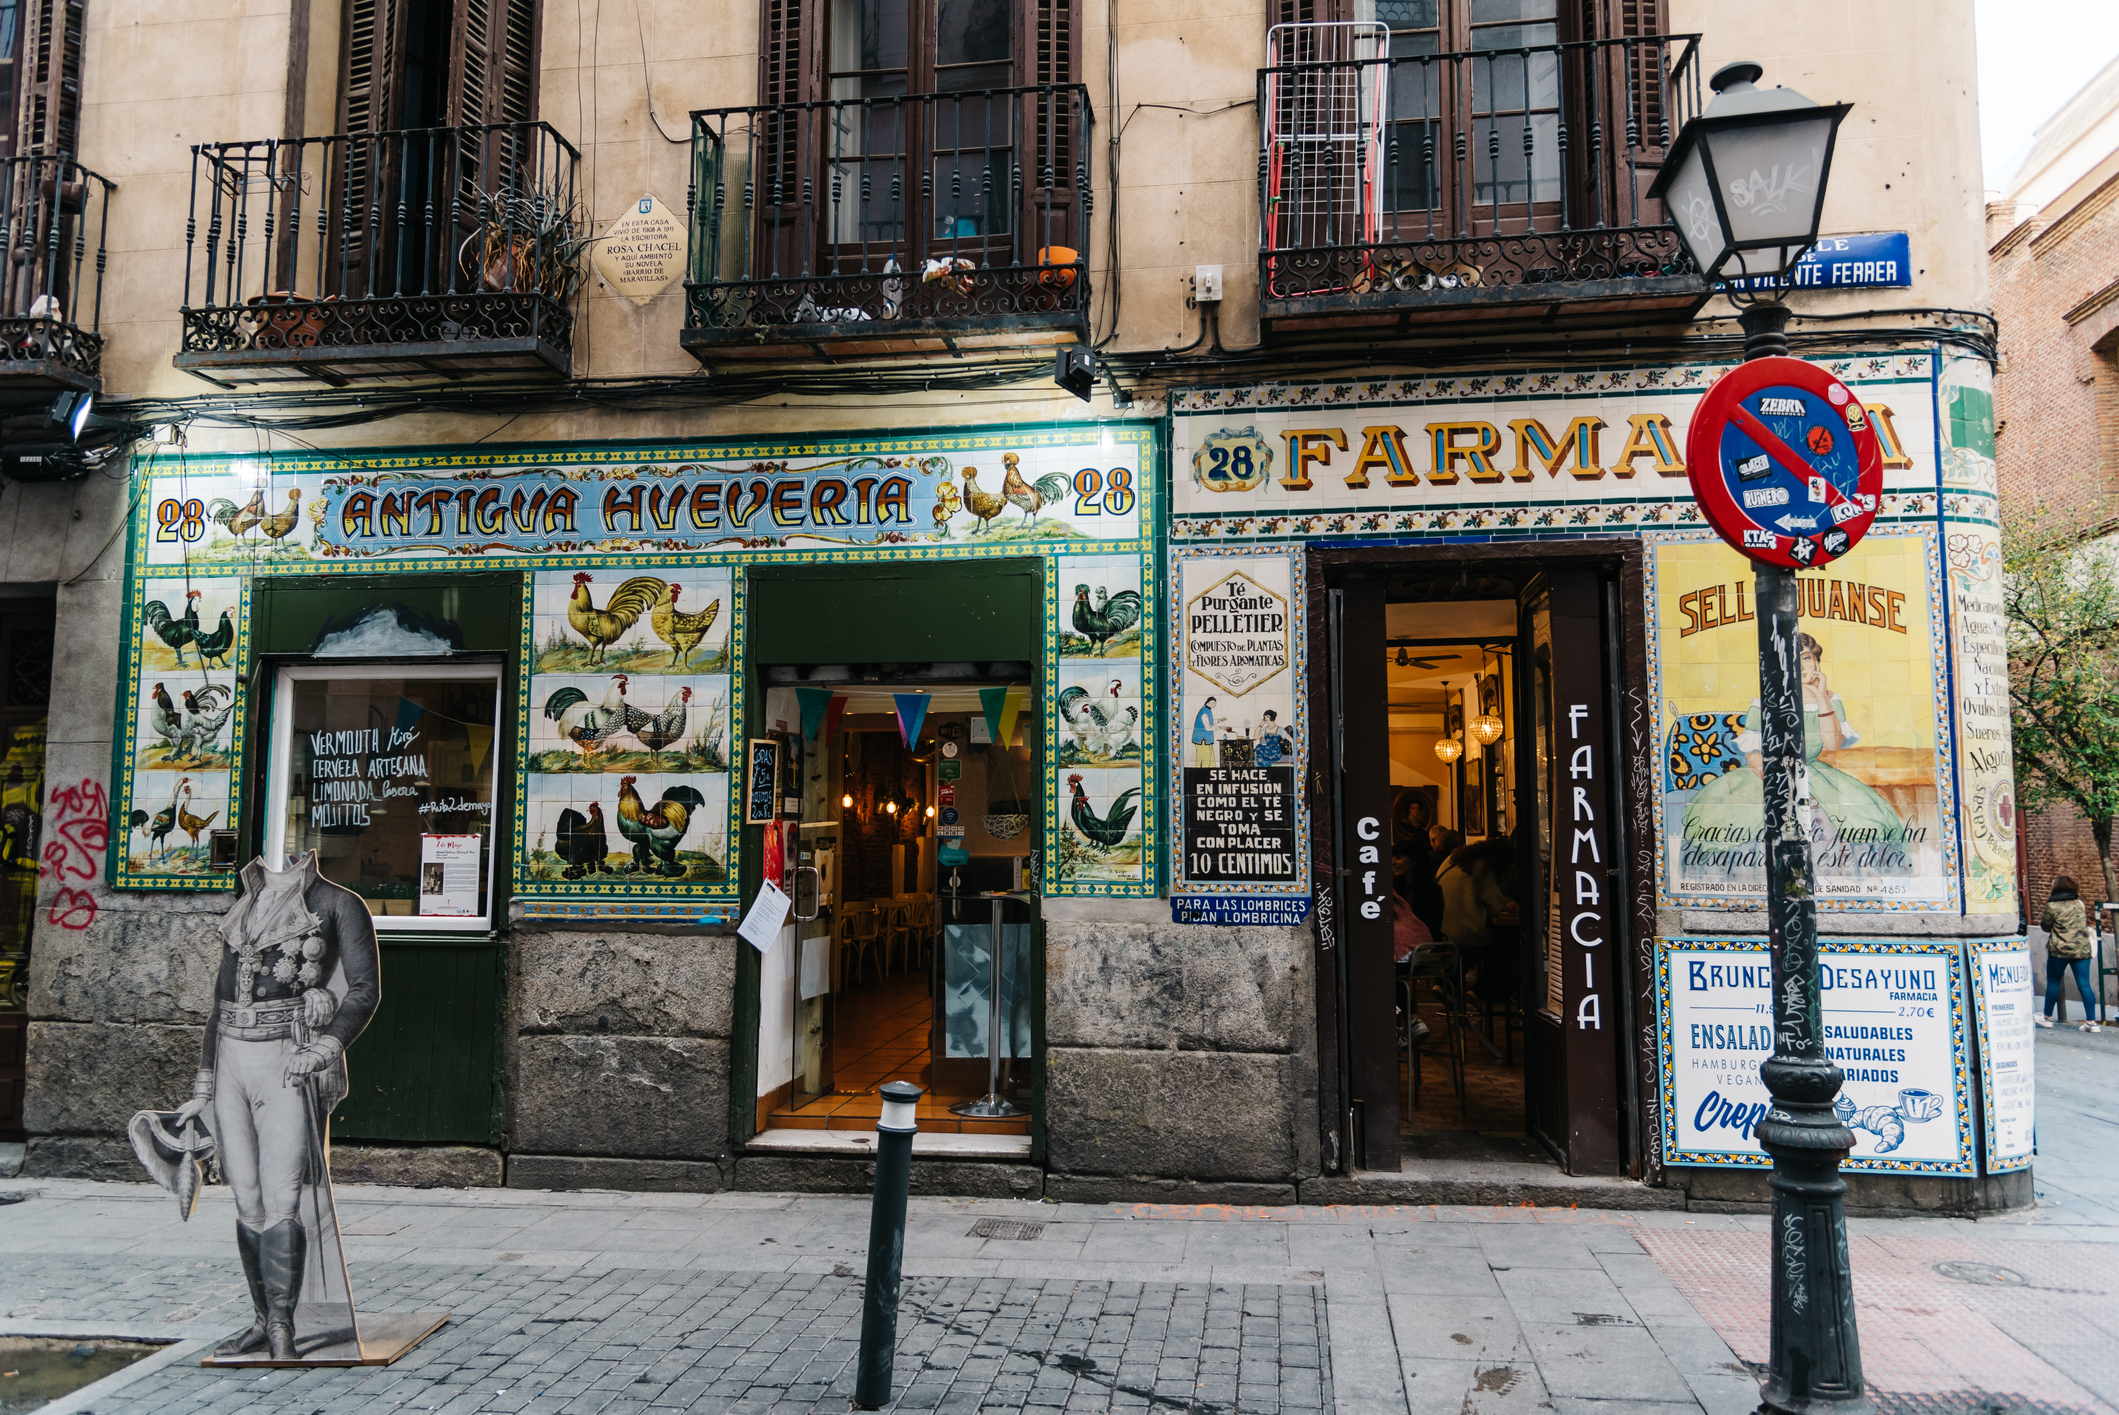 Madrid, Spain - November 3, 2017: Vintage storefront in Malasaña district in Madrid. Malasaña is one of the trendiest neighborhoods in Madrid, well known for its counter-cultural scene